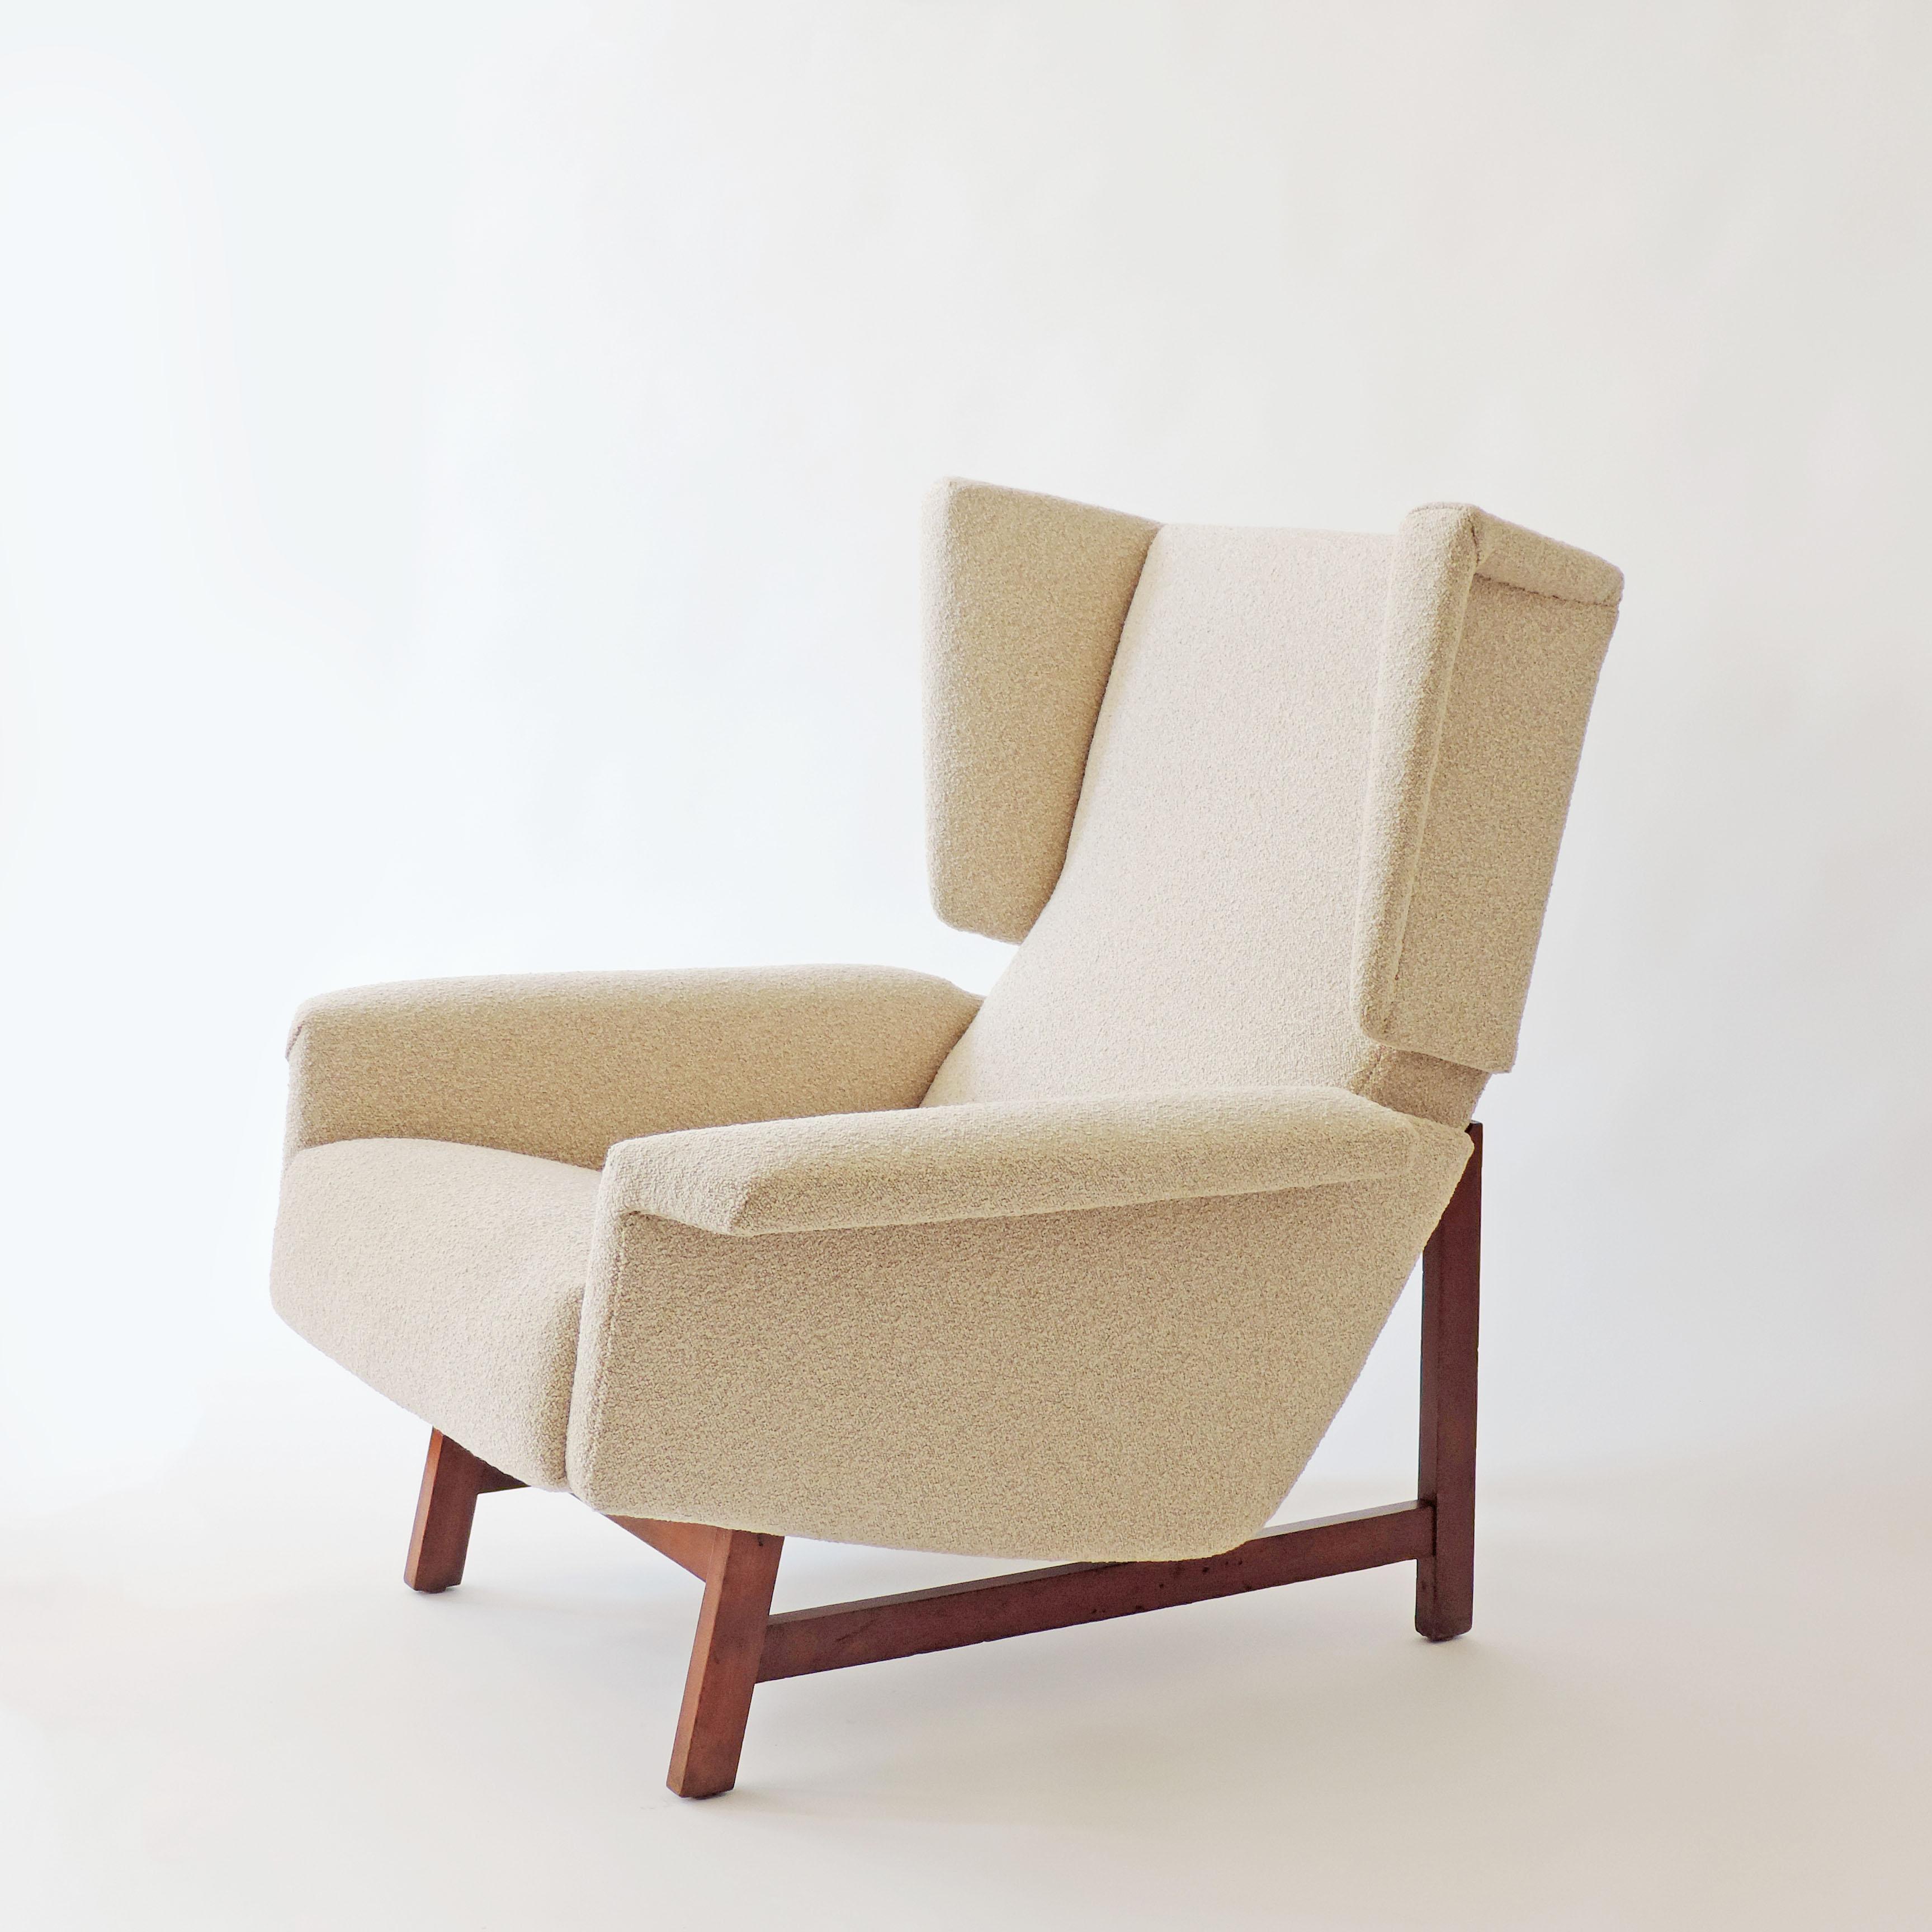 Mid-20th Century Monumental Pair of Italian 1960s Lounge Chairs